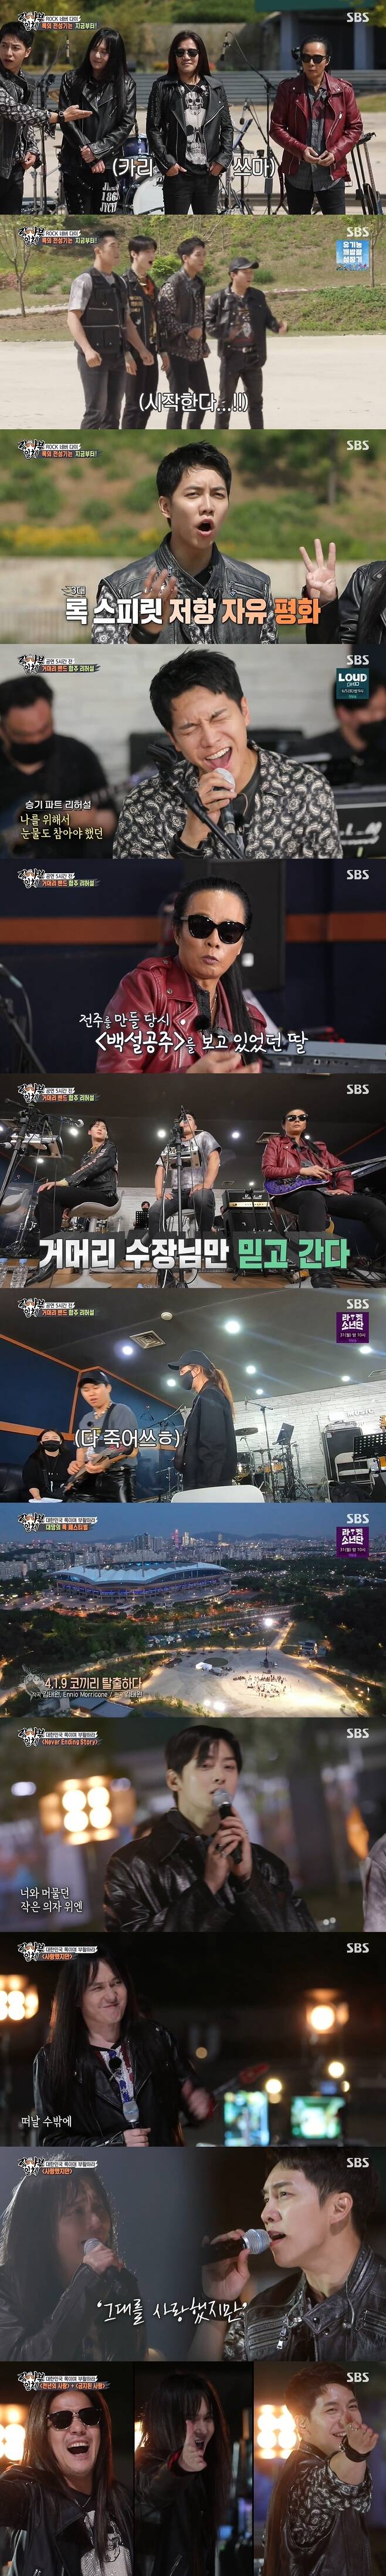 Seoul = = All The Butlers presented a non-face-to-face rock festival with The Godfather Kim Tae-won, Kim Kyung-ho and Park Wan-kyu of Korean rock.On SBS All The Butlers broadcast on the afternoon of the 23rd, Rocks The Godfather Kim Tae-won, Kim Kyung-ho and Park Wan-kyu were sent to the master.Lee Seung-gi met Kim Kyung-ho and said, I called  forbidden love last year, and it is over 10 million views now. Kim Kyung-ho said, The middle and high school students knew it with your song, He laughed.Kim Kyung-ho said, There is a peace of resistance freedom, referring to Rox Spirit. He said, But nowadays, I have compromised a lot with society.We are doing the stage only in front of the staff without performing in Corona City. Now I want to do the rock festival and I want to make All The Butlers members our successor.Kim Kyung-ho and Park Wan-kyu, who maintain long-haired style, also spoke the secret to their hair.Kim Kyung-ho said: To dry with a fan, cold wind, and wear hair loss shampoo.I read all the later on how much it is, he said. Now I dye it naturally at home. Park Wan-kyu said, I use a peanut shampoo.We should also use shampoo well, he said. Rockers are in a hurry, but these shampoos should be left unattended.All The Butlers set the team name as an intense leech band and then went into concert rehearsal.Lee Seung-gi, after revealing his fanfare, caught his ear with Kim Kyung-ho Park Wan-kyu, who was enthusiastic about Millennial Love.Kim Tae-won also wrote Snow White OST on the intro, and while working on the song, she was watching Snow White and she wrote it because she wanted to do it. Then Jung Eun-woo and Kim Dong-Hyun sang the resurrection Never Ending Kahaani and Kim Dong-Hyun was struggling to beat.The two-way version of Bon Jovis Its My Life was selected and performed unexpectedly. The song-selected people began full-scale practice five hours before the performance.Since then, All The Butlers members and rock masters have performed this show, and several band members who are active as bands have participated in non-face-to-face activities.First, Park Wan-kyu and Kim Kyung-ho opened up the atmosphere with an intense rock style Shout.Kim Tae-won played a song called 4.1.9 Elephant Escape and played guitar and played a deep lull.I did not know rock well, but I was attracted to it this time, and rock was a Never Ending so that rock could revive once again, said Jung Eun-woo, and then enthusiastically sang Never Ending Kahaani with Kim Dong-Hyun.Kim Dong-Hyun admired it, saying, Its about singing in this taste.Finally, Lee Seung-gi was impressed by the I loved you with Kim Kyung-ho.Park Wan-kyu also joined the group and was thrilled by the explosive singing power as well as the charm of rock with Millennial Love and Forbidden Love.Those who gave Jonnys Seperate Ways as an encore song came to the stage together and took control of the venue with powerful singing ability.Various bands that were together in the non-face-to-face cheered and ended.Meanwhile, All The Butlers is broadcast every Sunday at 6:25 pm.